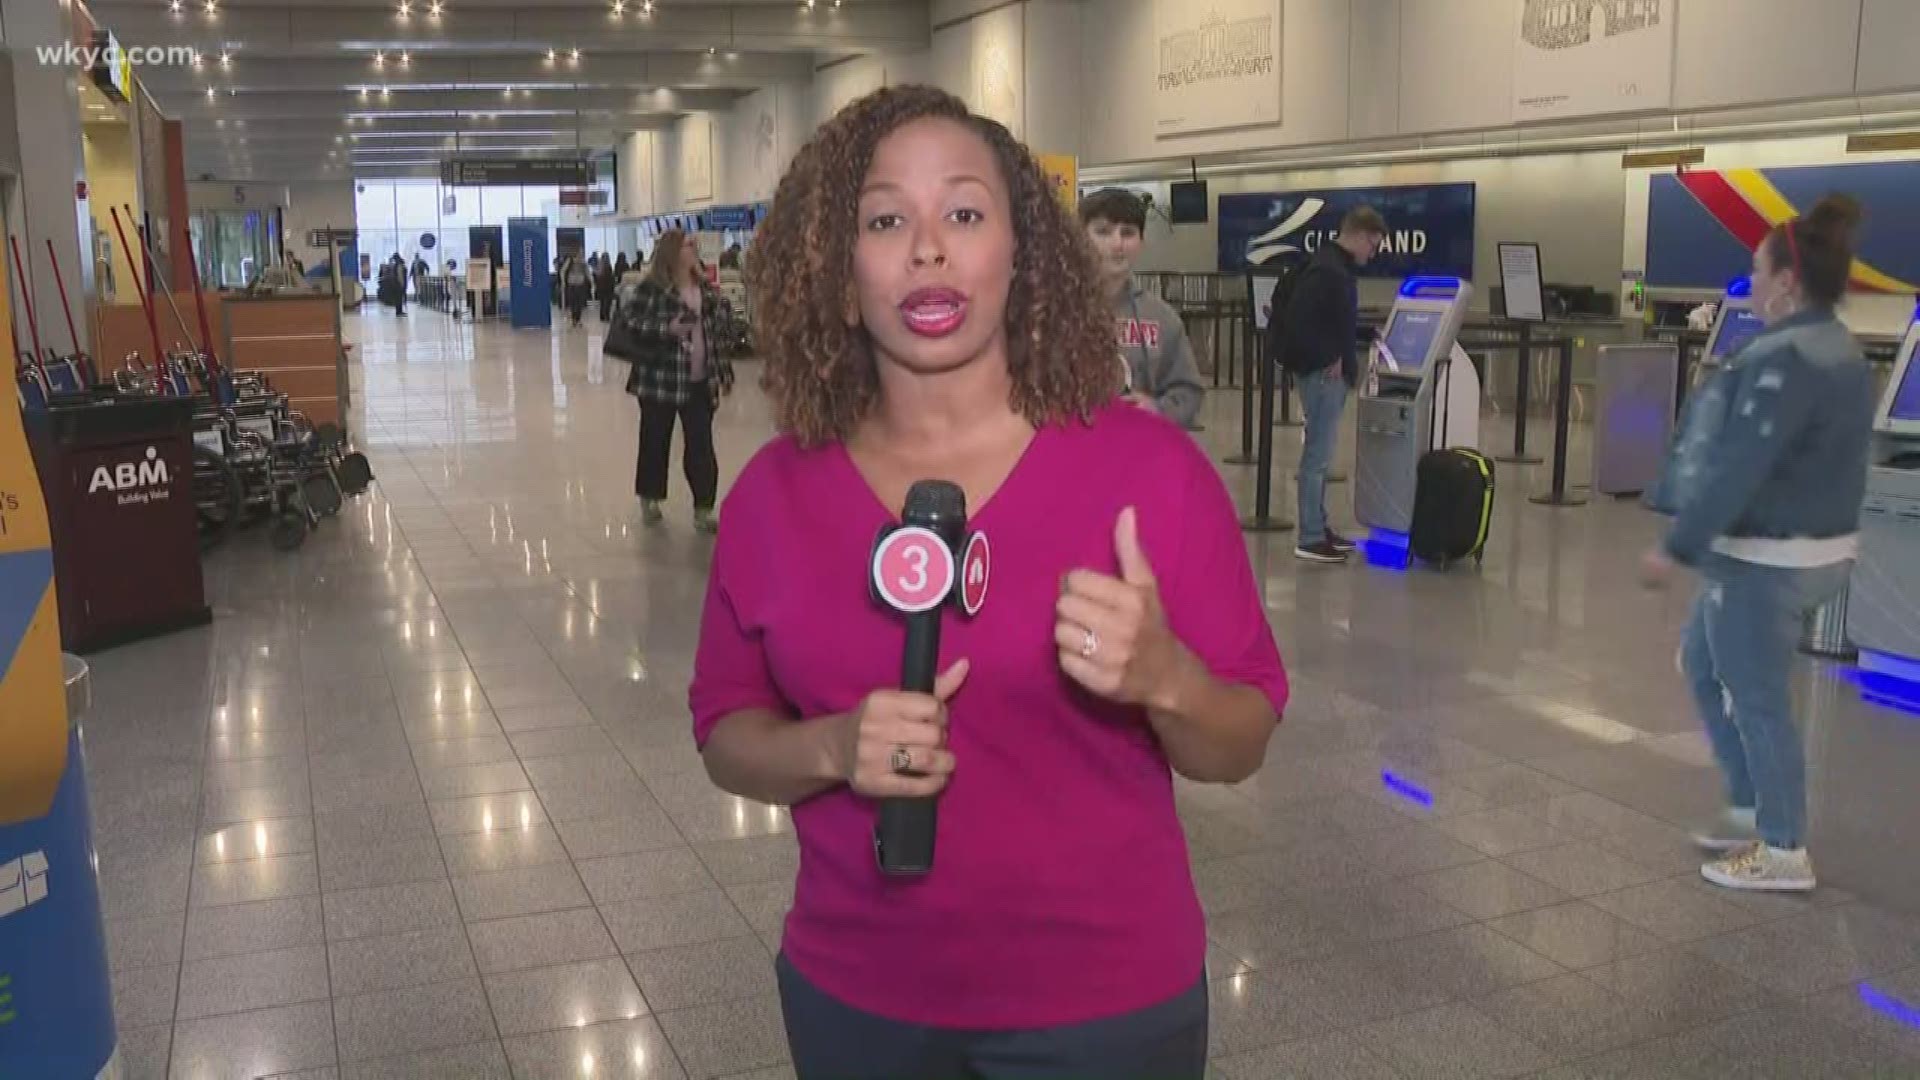 3 cases of coronavirus have been confirmed in Ohio. 3News' Romney Smith tells us how travelers are reacting to the news.